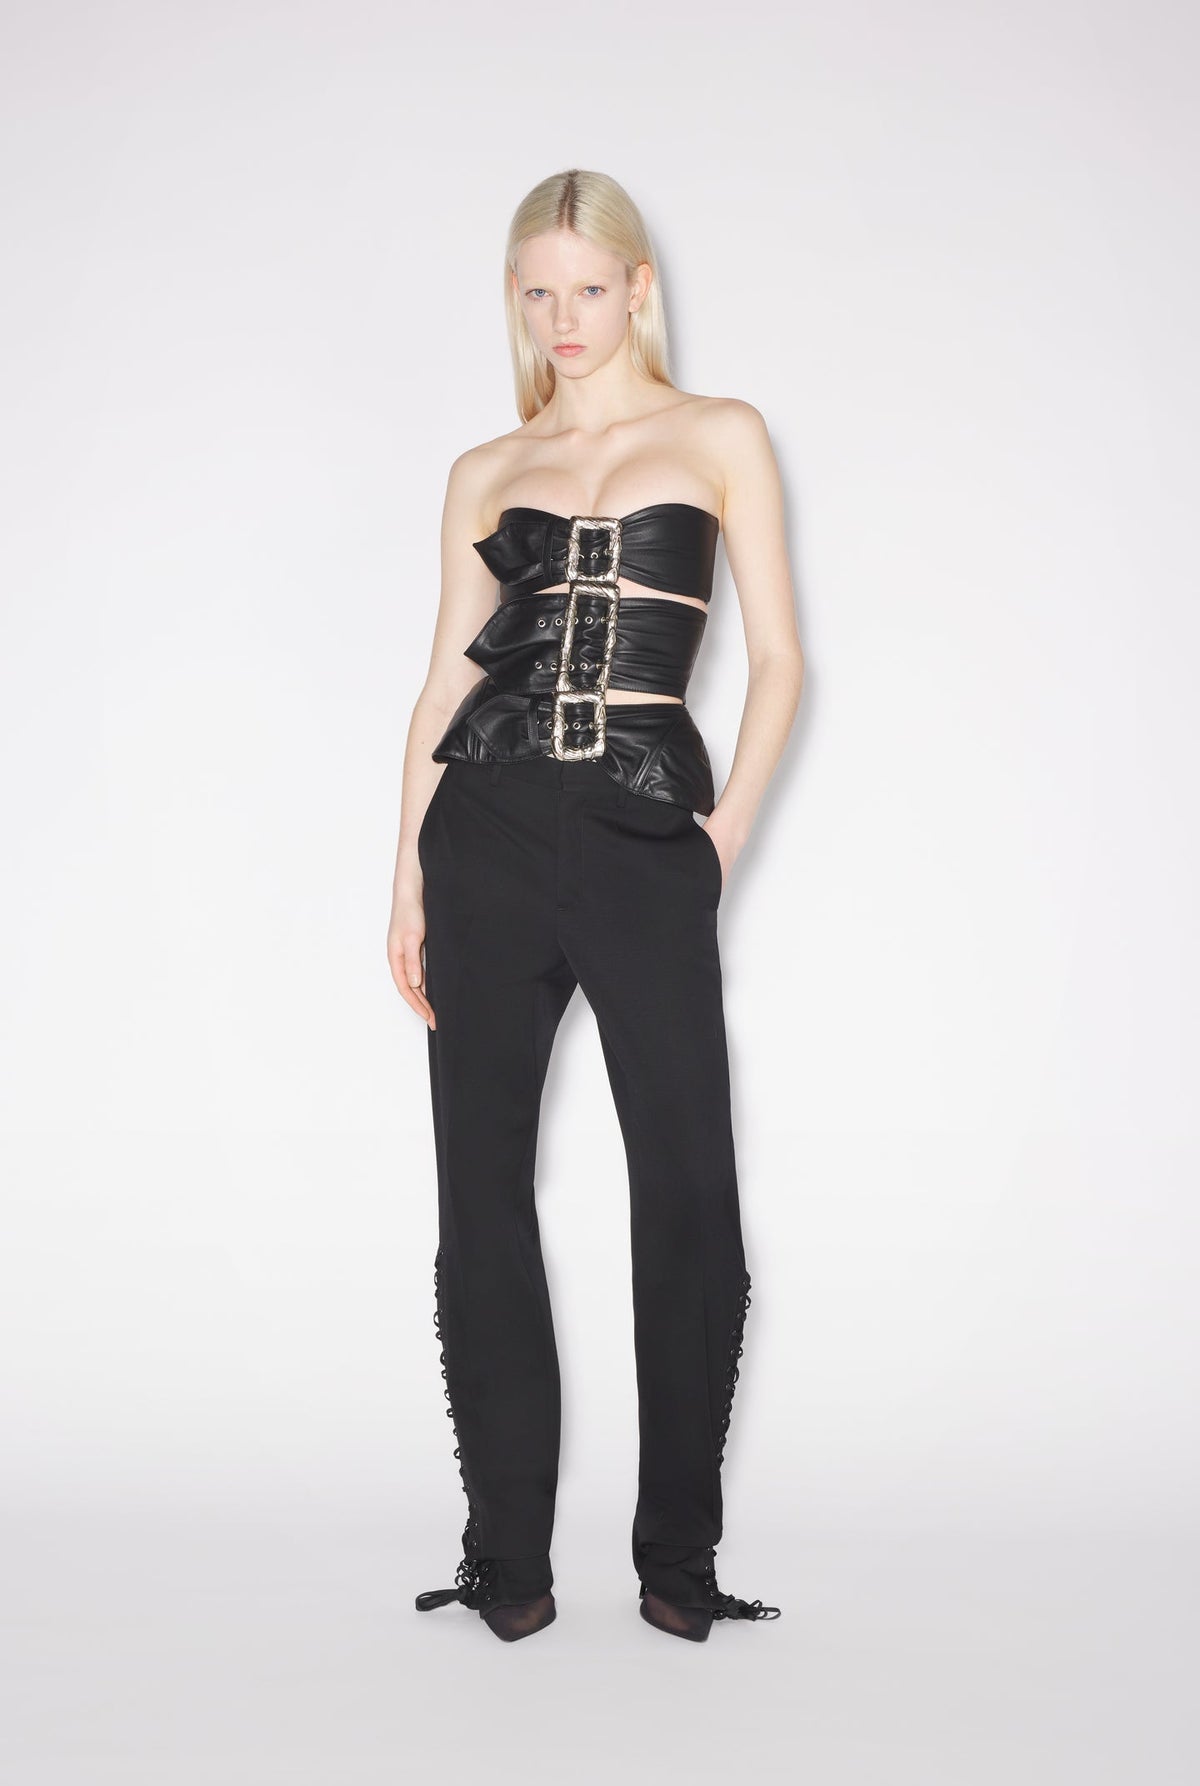 The Buckle Bustier